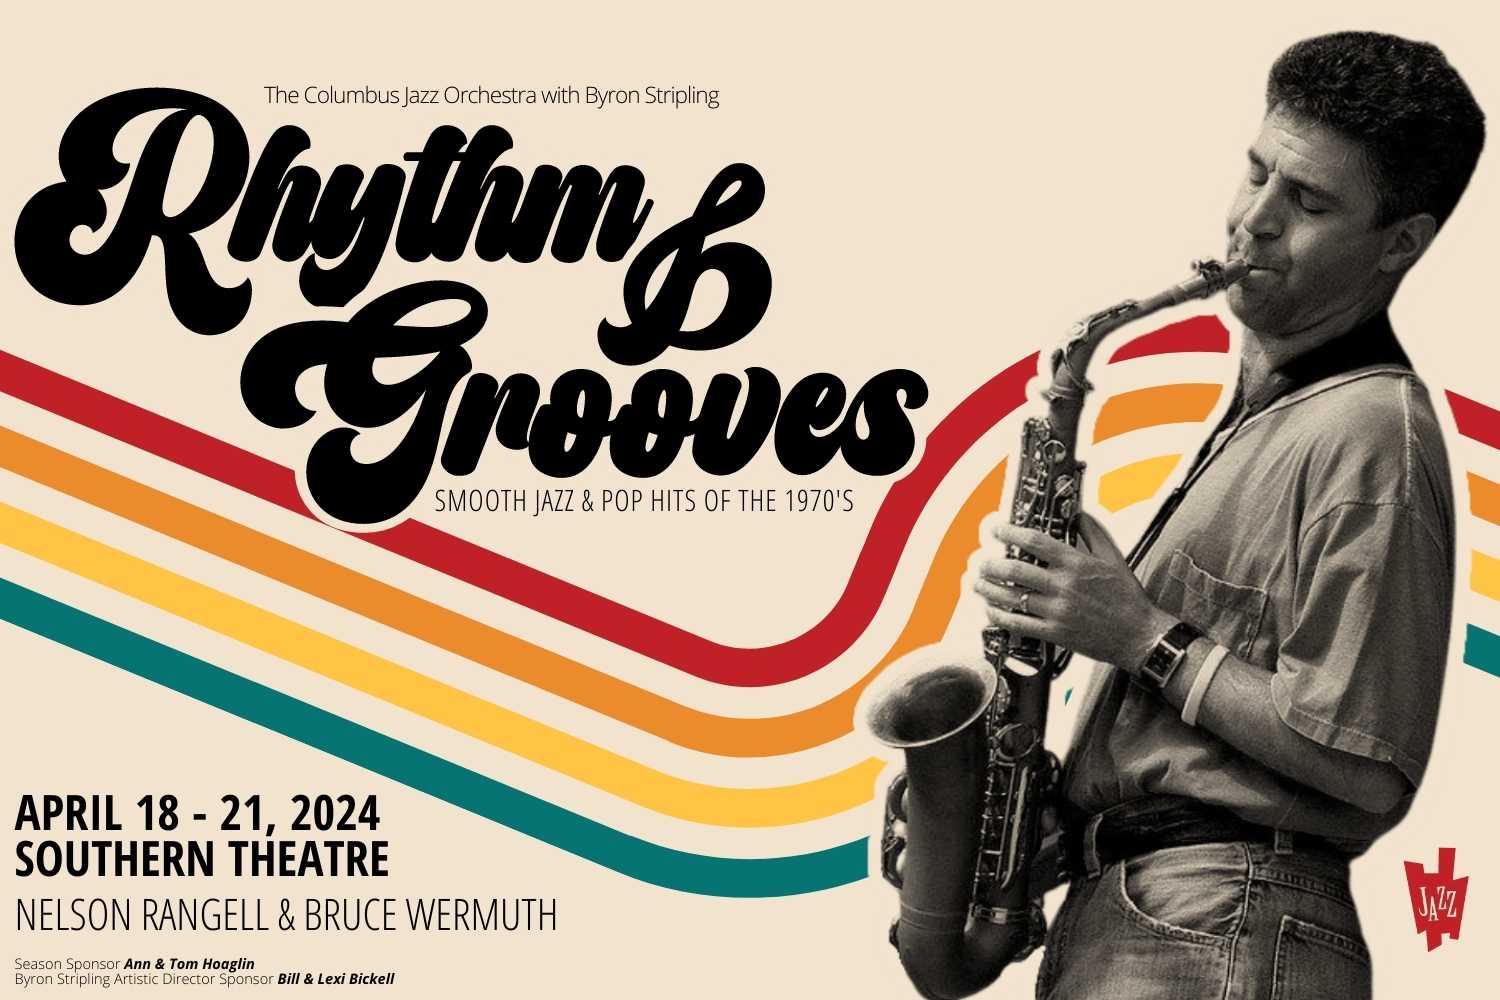 Rhythm & Grooves - Smooth Jazz & Pop Hits of the 1970’s